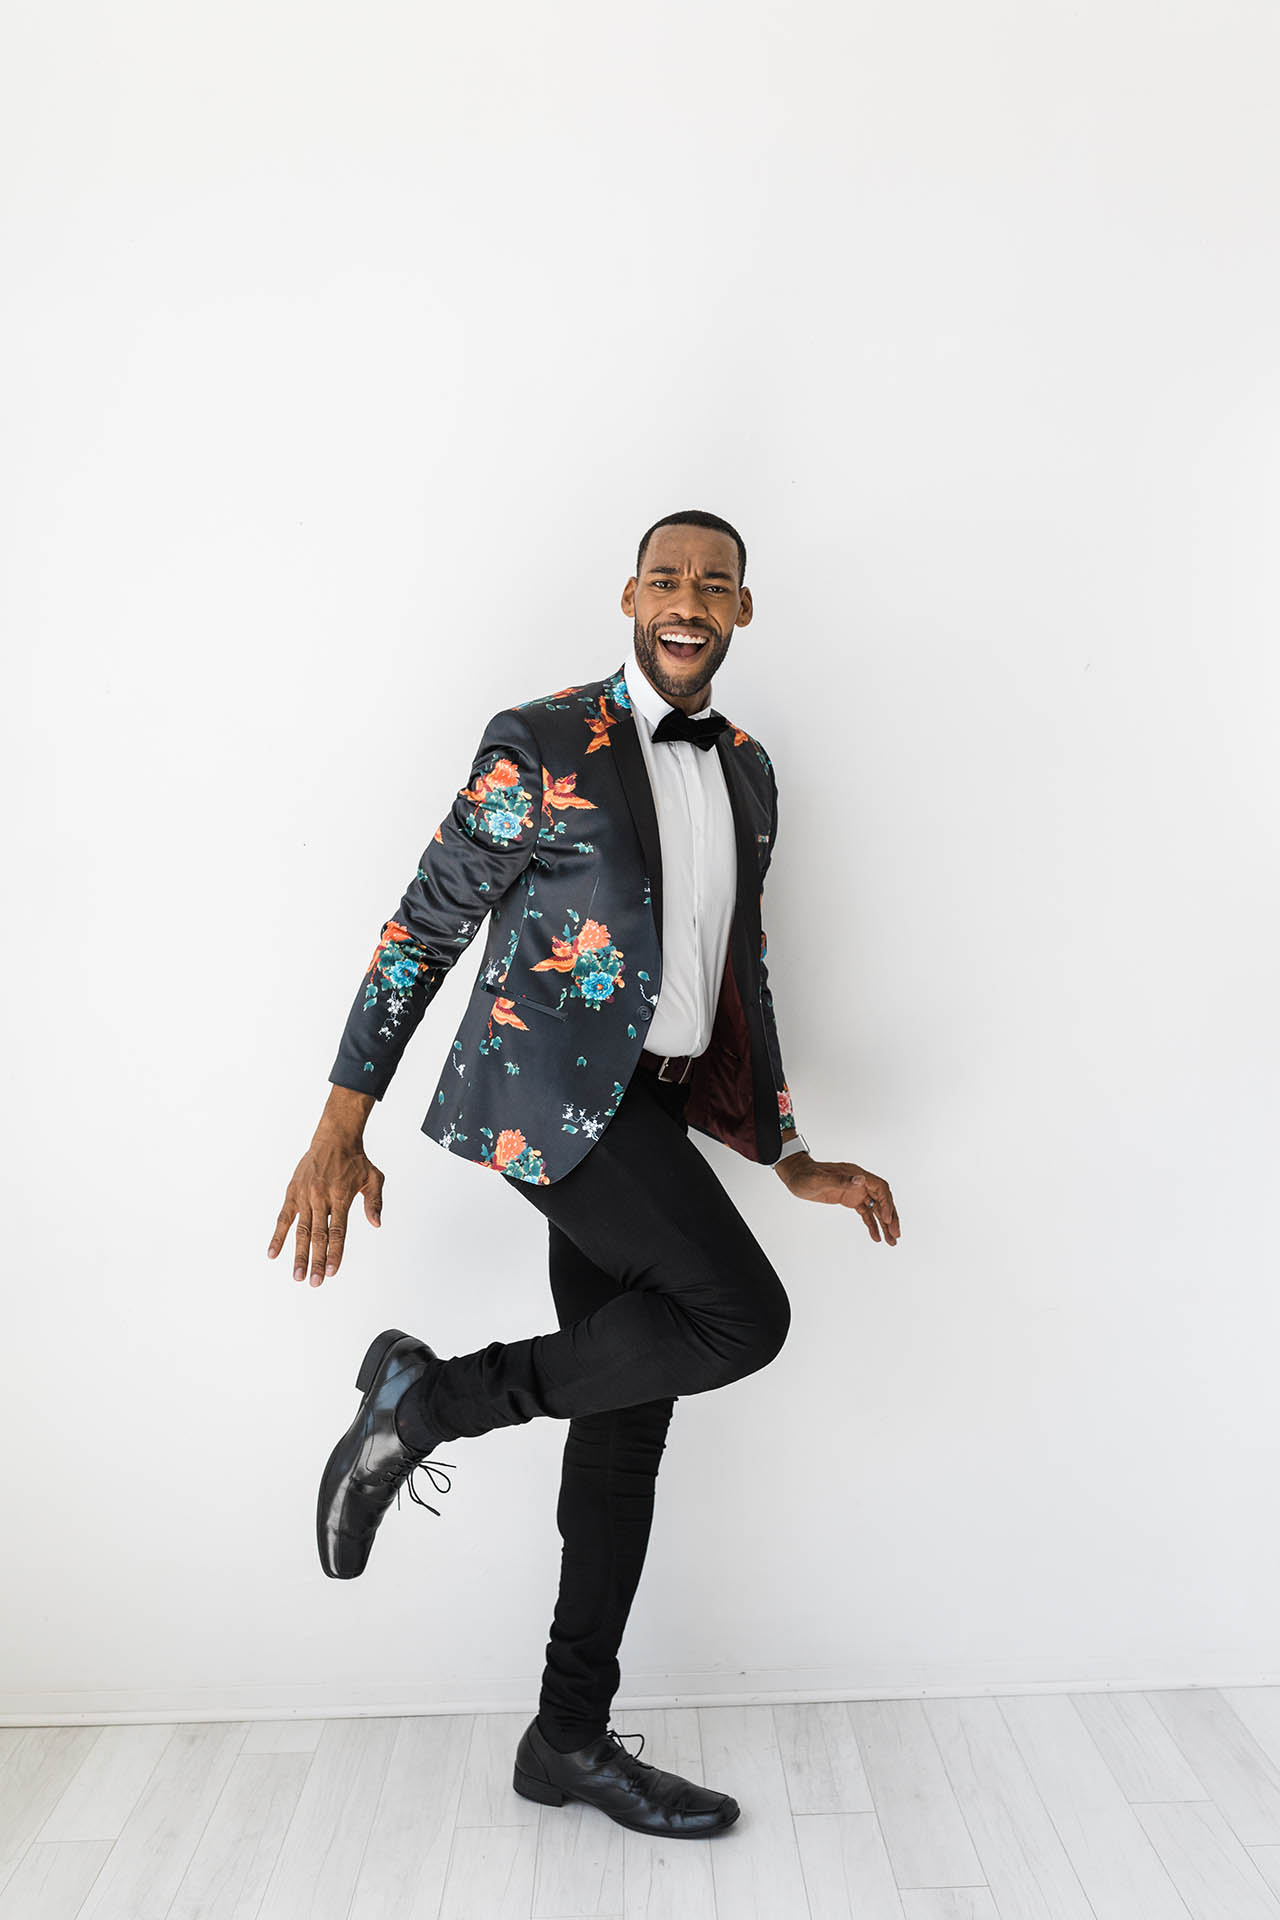 Men's fashion photos; detail shot of an African American male's stylish black and floral suit jacket. He is posed energetically with a smile in front of a white background.